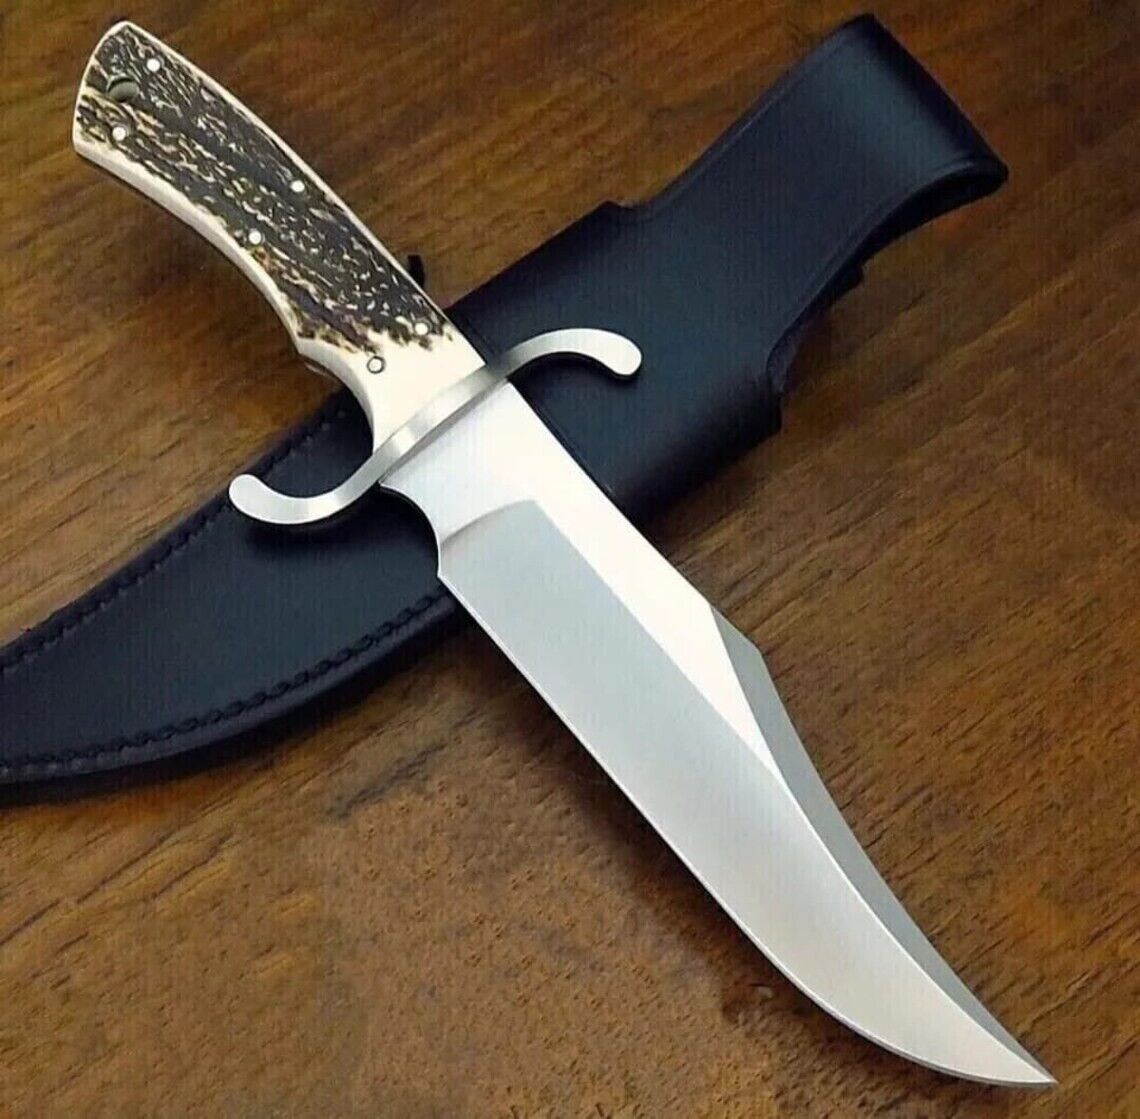 Handmade Stainless Steel Bowie Hunting Knife For Camping Hiking Outdoor Fishing